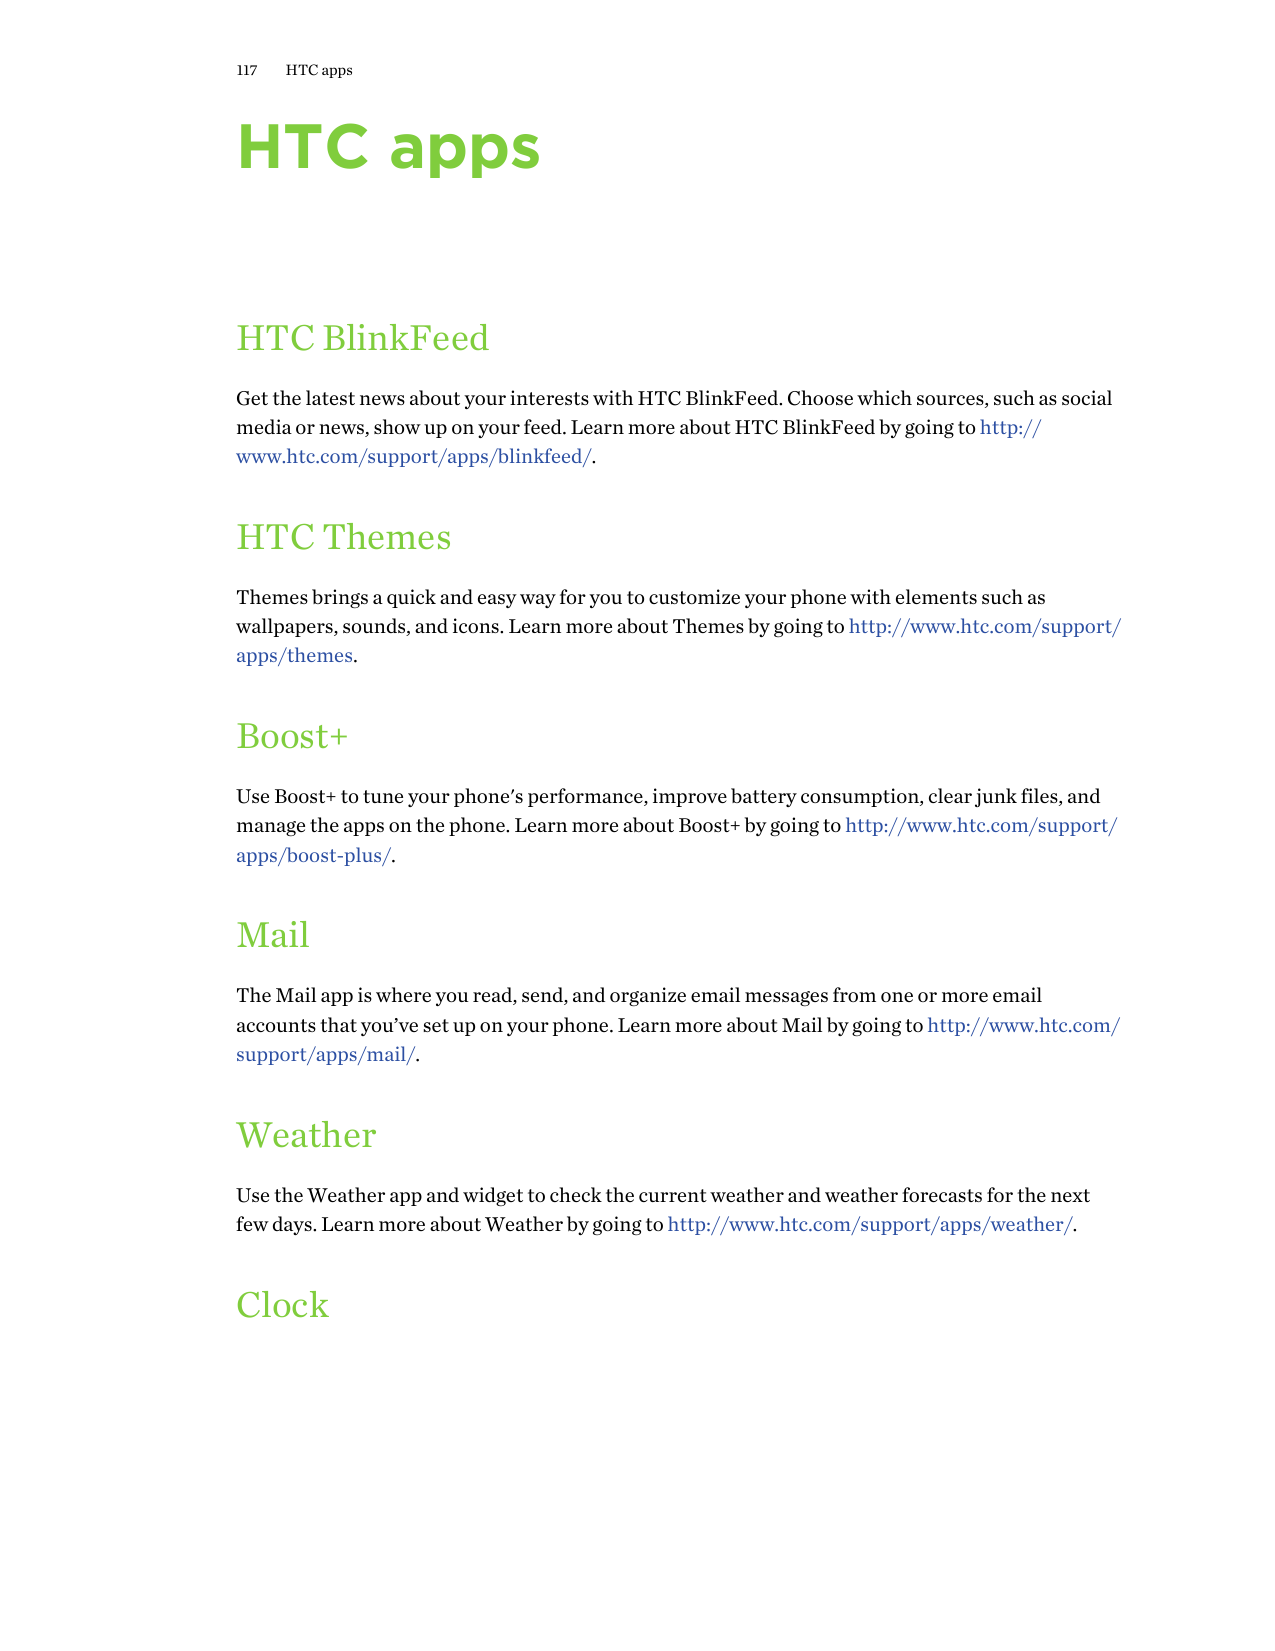 117HTC appsHTC appsHTC BlinkFeedGet the latest news about your interests with HTC BlinkFeed. Choose which sources, such as socia